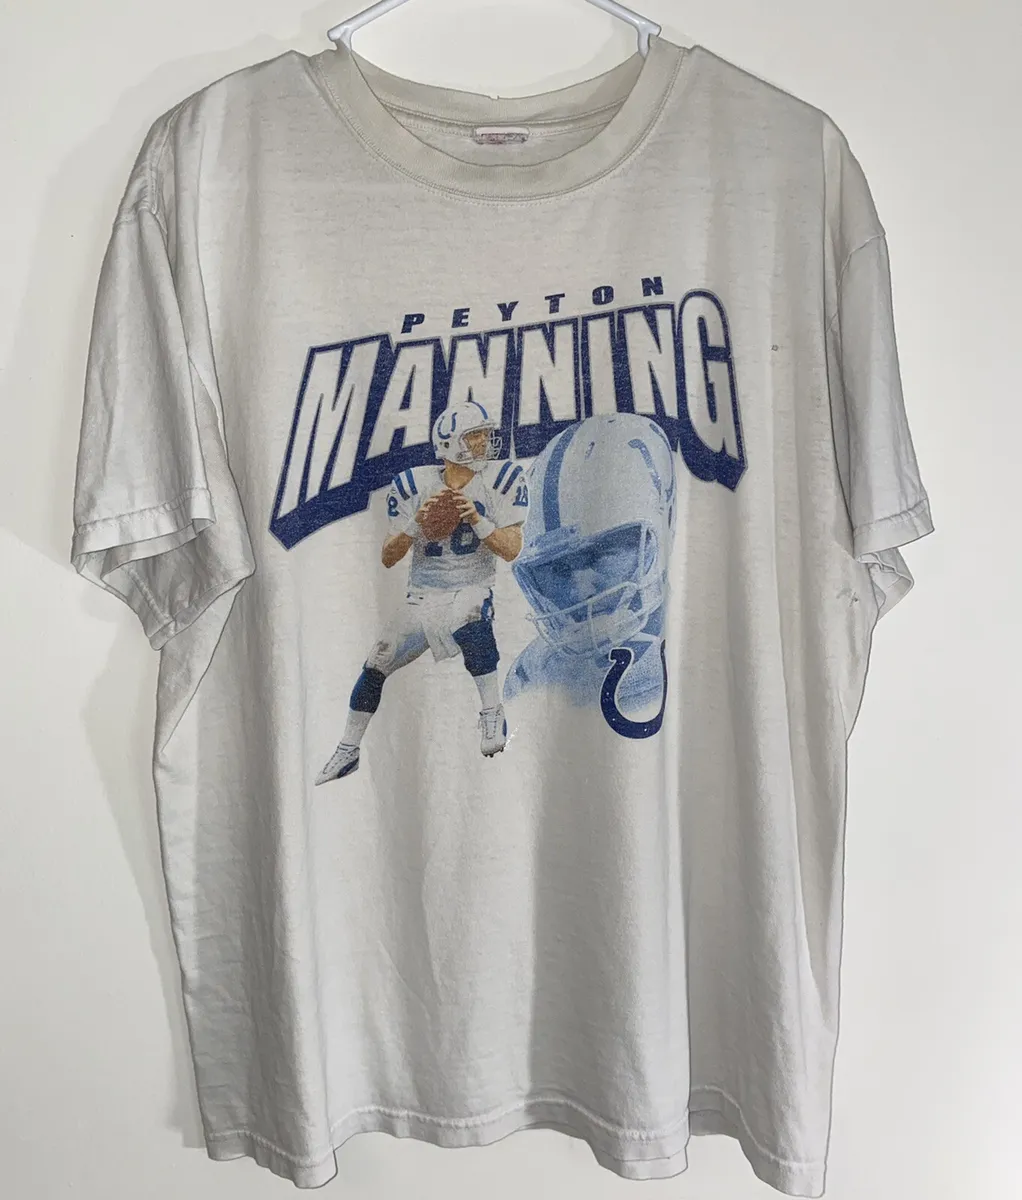 colts graphic tee